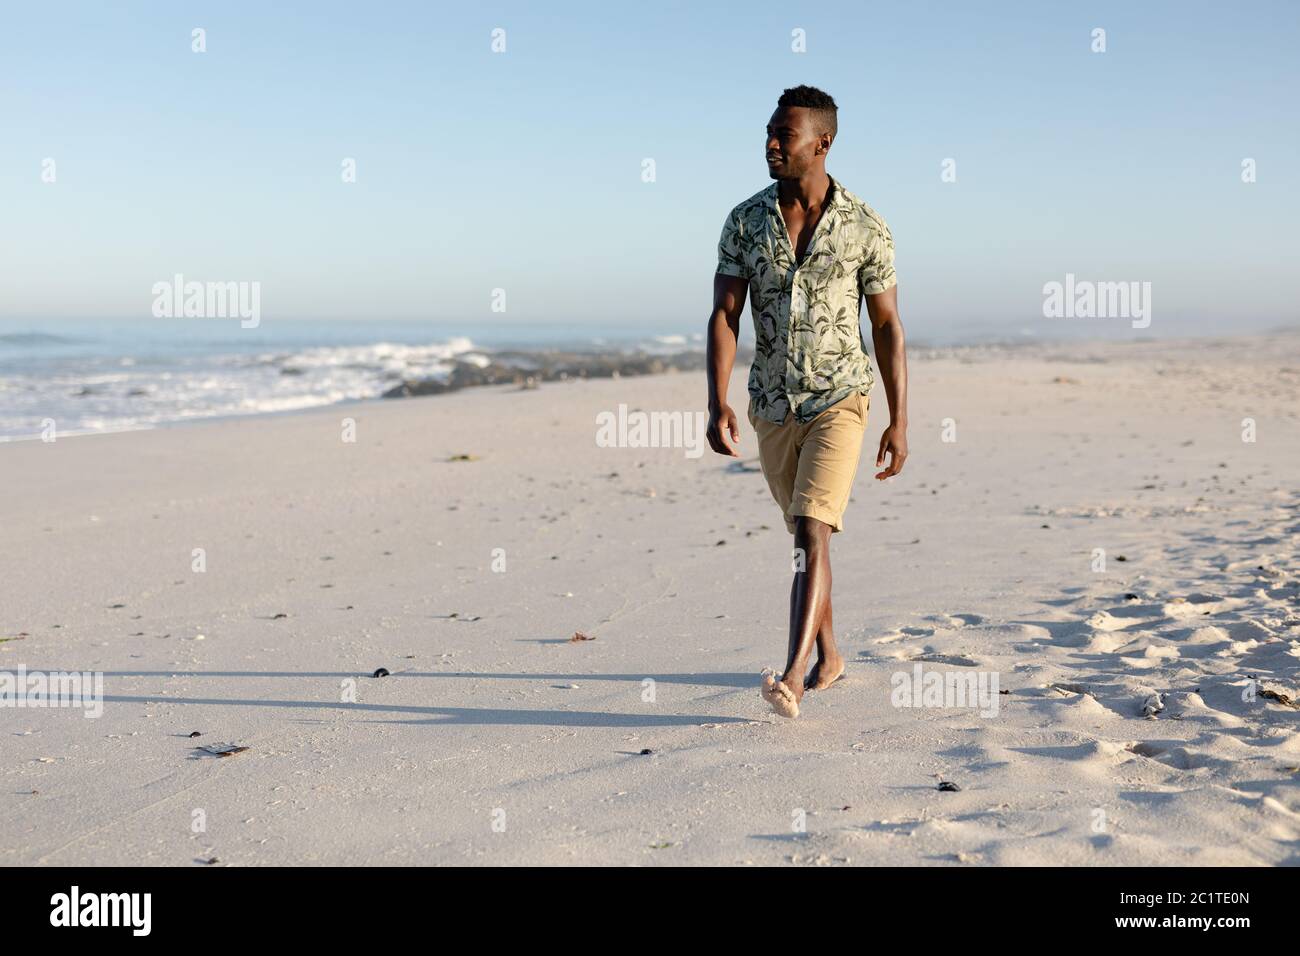 An African American man walking on beach on a sunny day Stock Photo